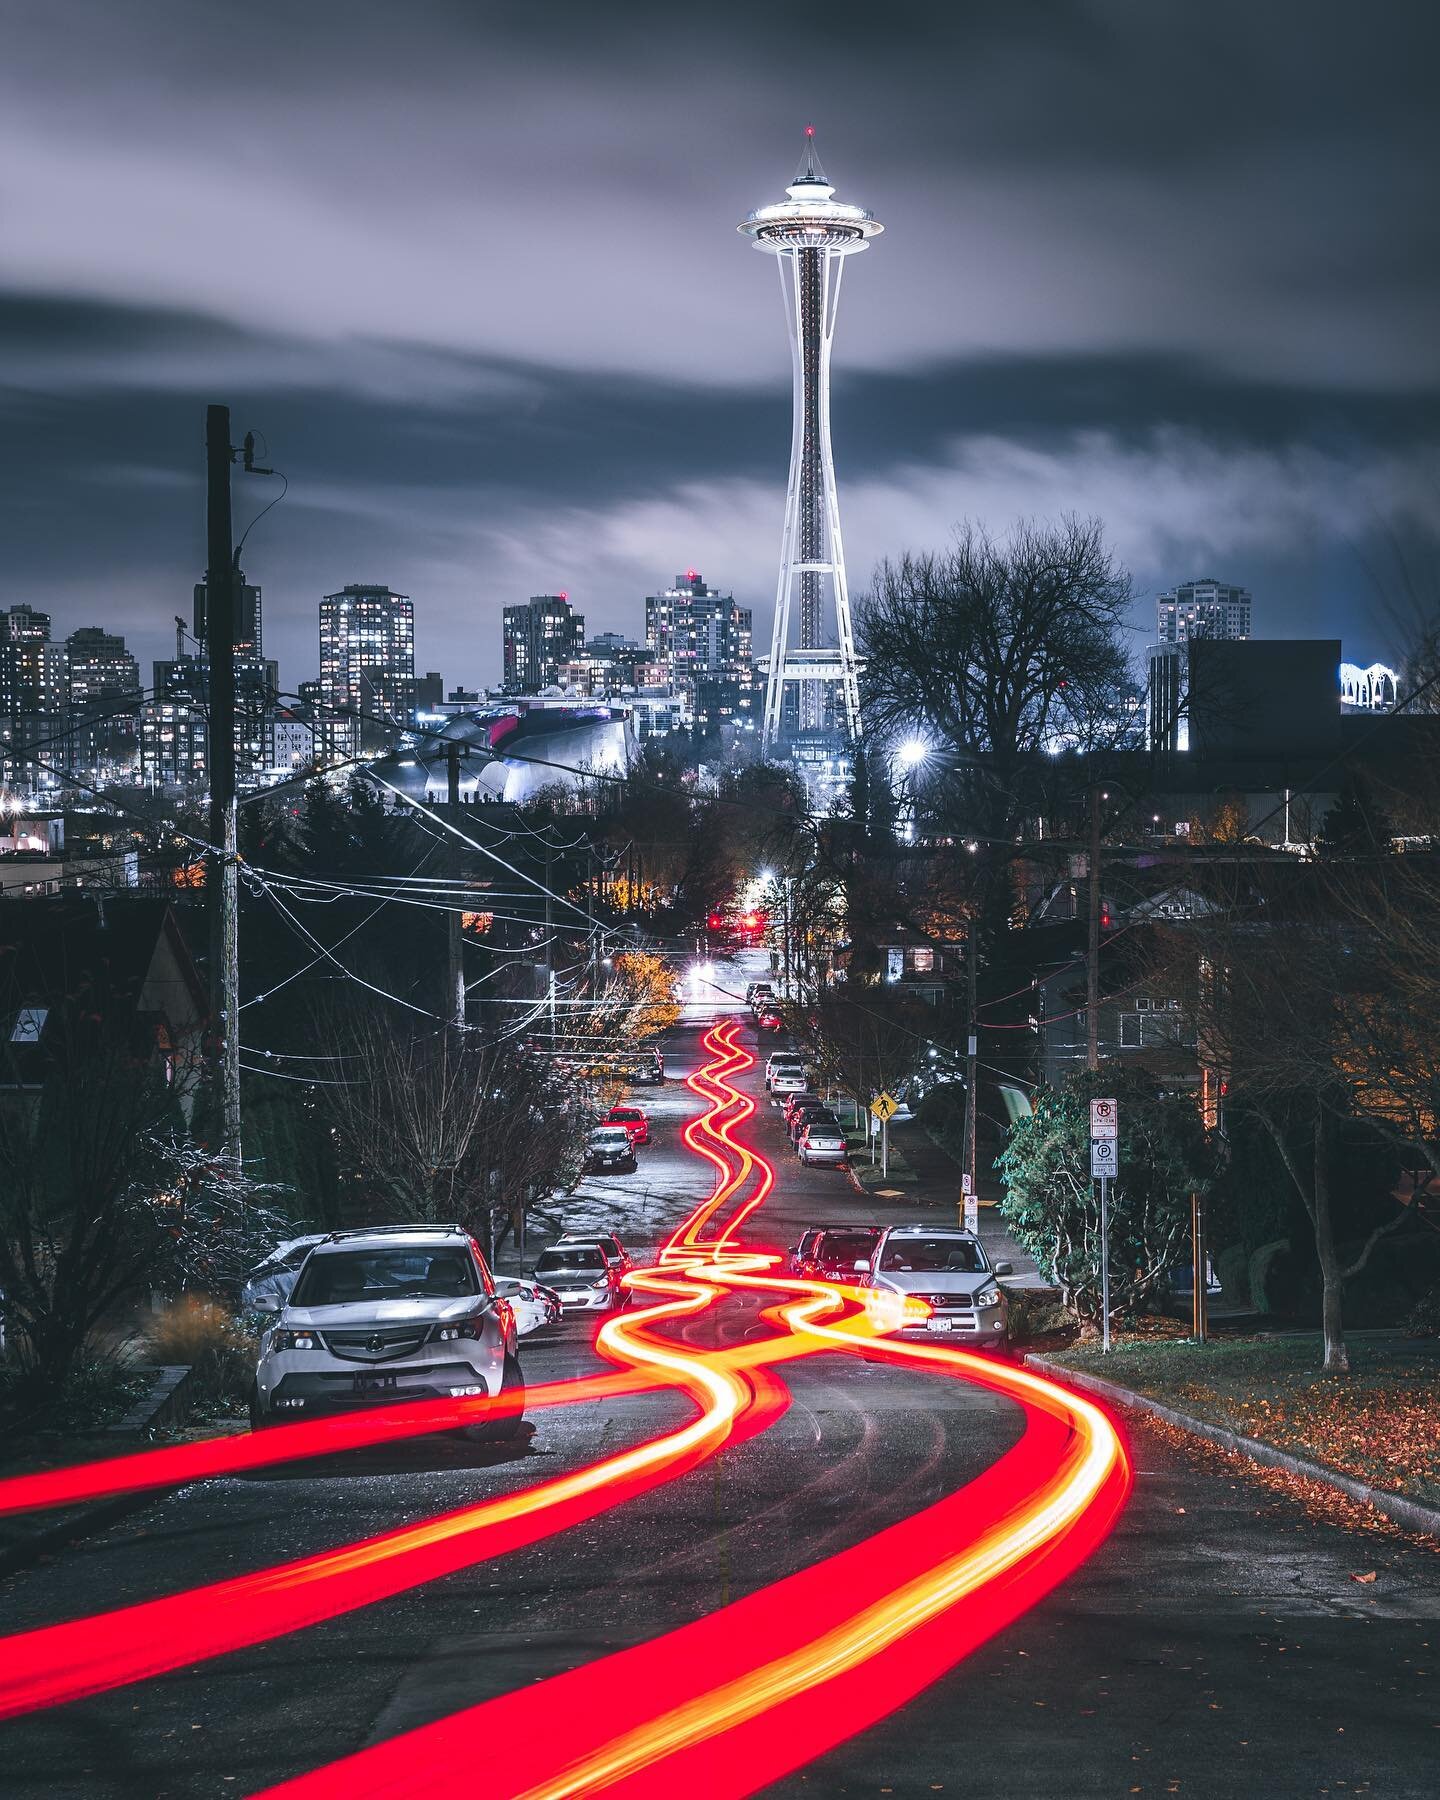 Happy new year everyone! 

Fun night chasing lights with @johnnyhd24 
.
.
.
.
#curiocityseattle #pnw_shooters #shooters #citykillerz #seattle_sites #night_owlz #seattle #toneception #shotz_fired #nightshooters #electic_shotz #sonyimages #artofvisuals